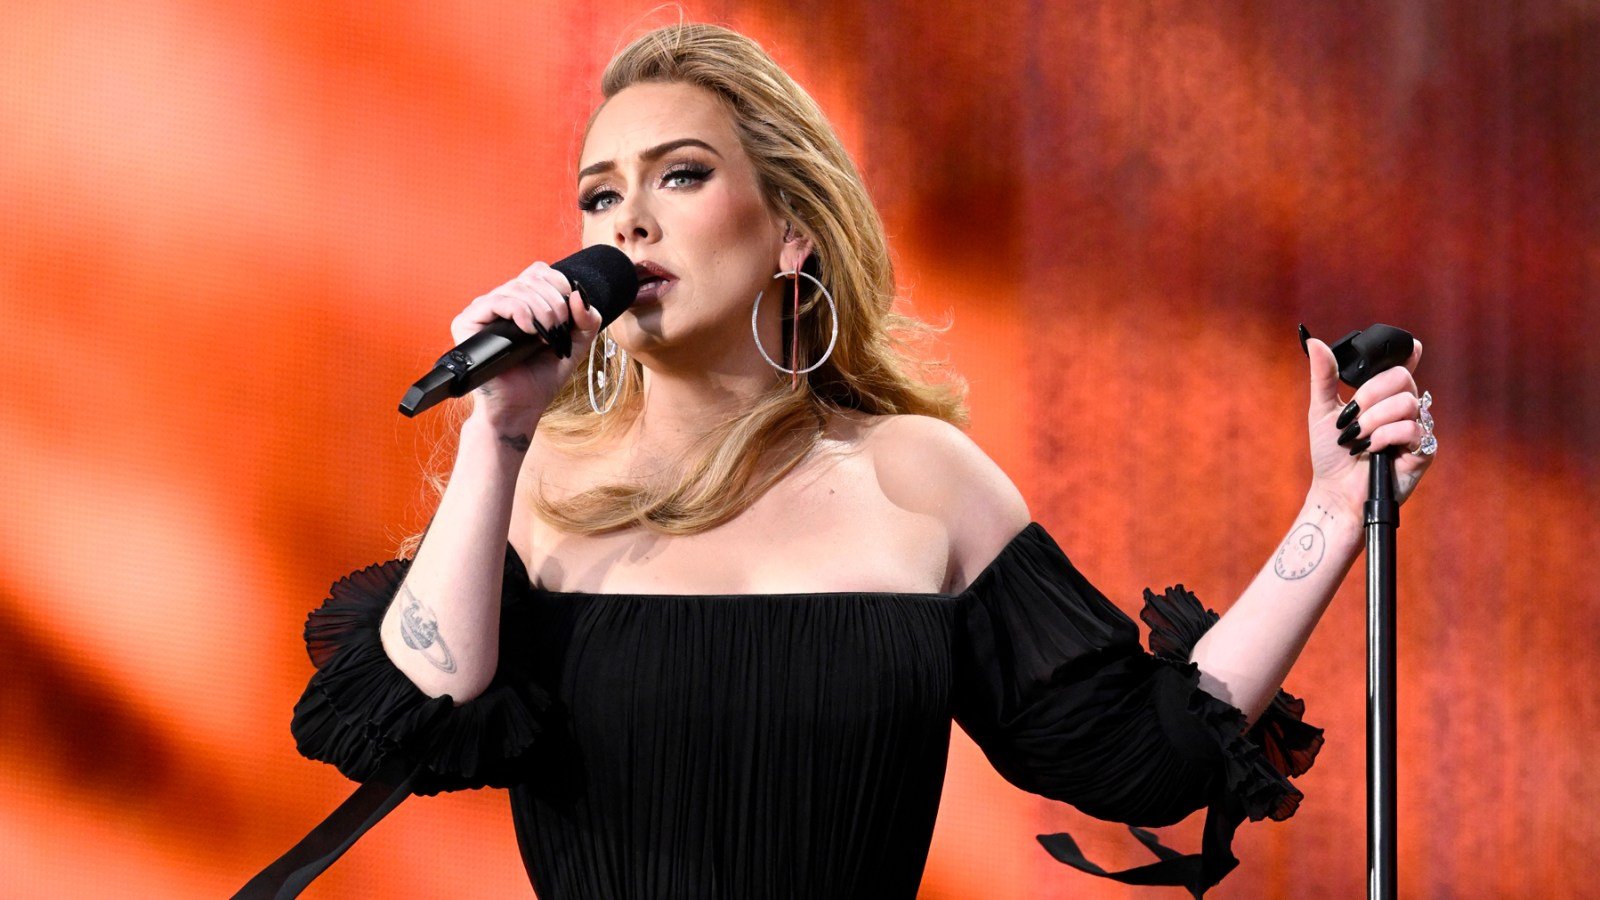 Adele Will Shift Focus to Non-Music Related Creative Projects Following Residency